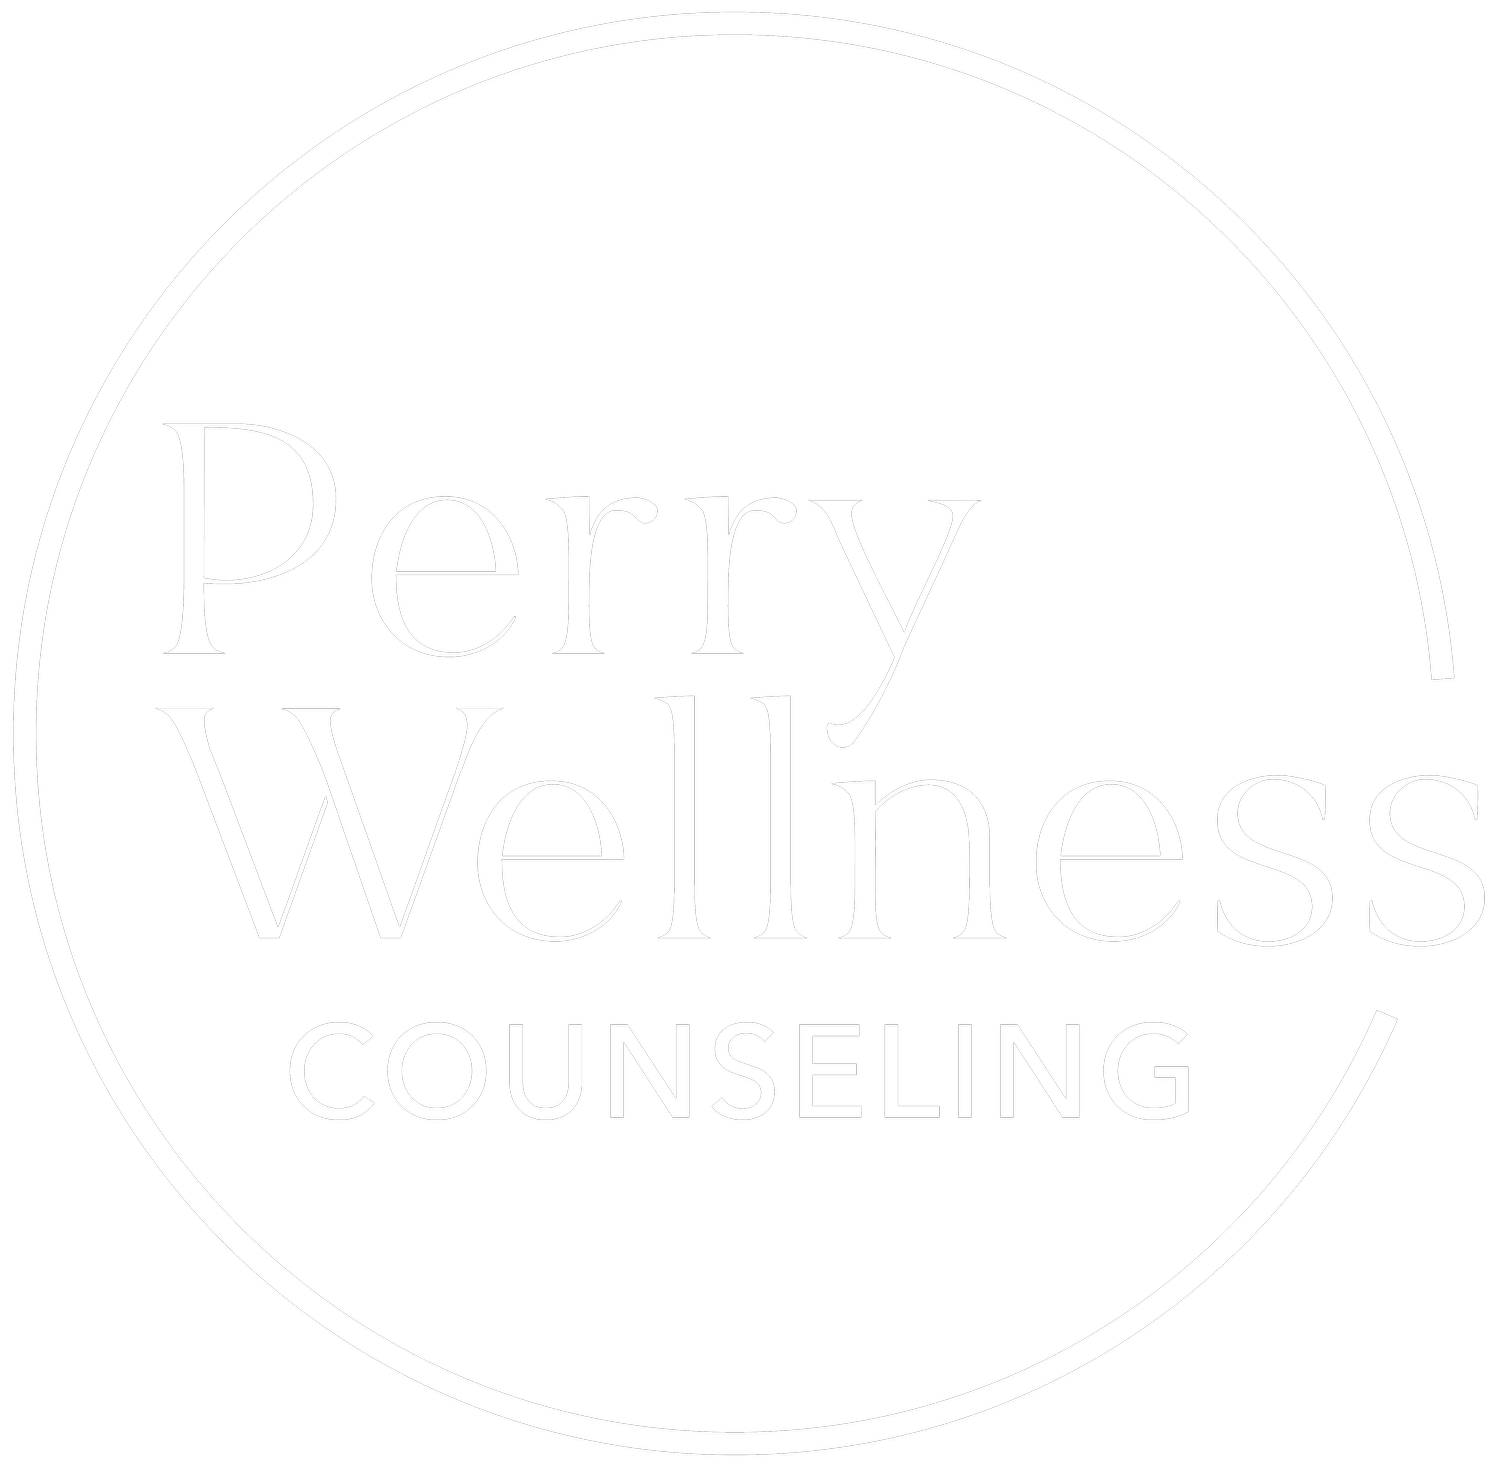 Perry Wellness Counseling